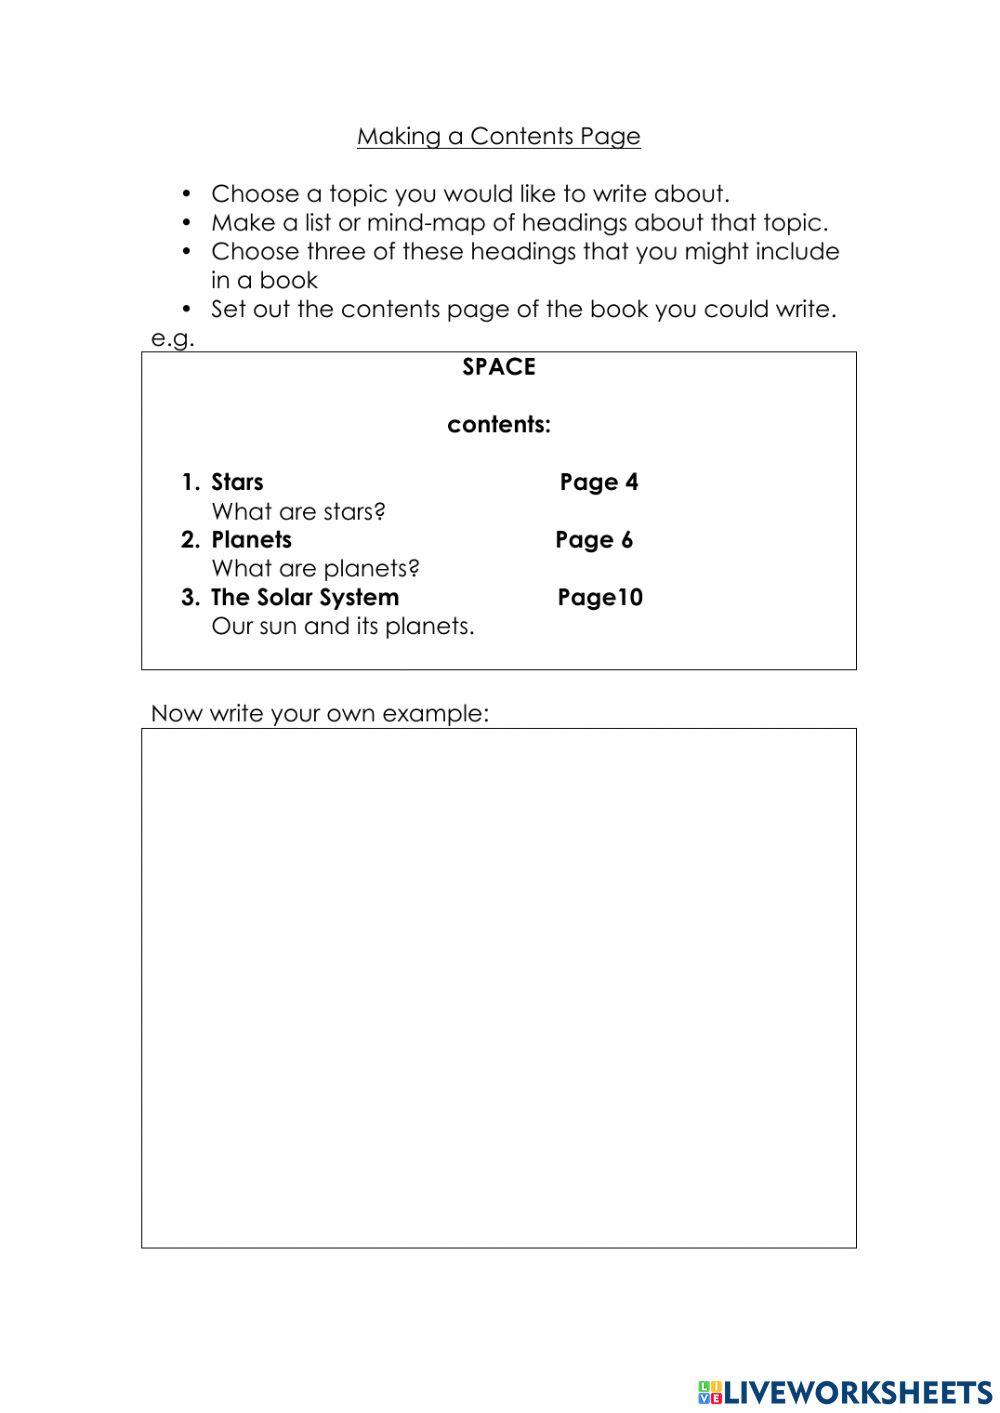 Make a contents page